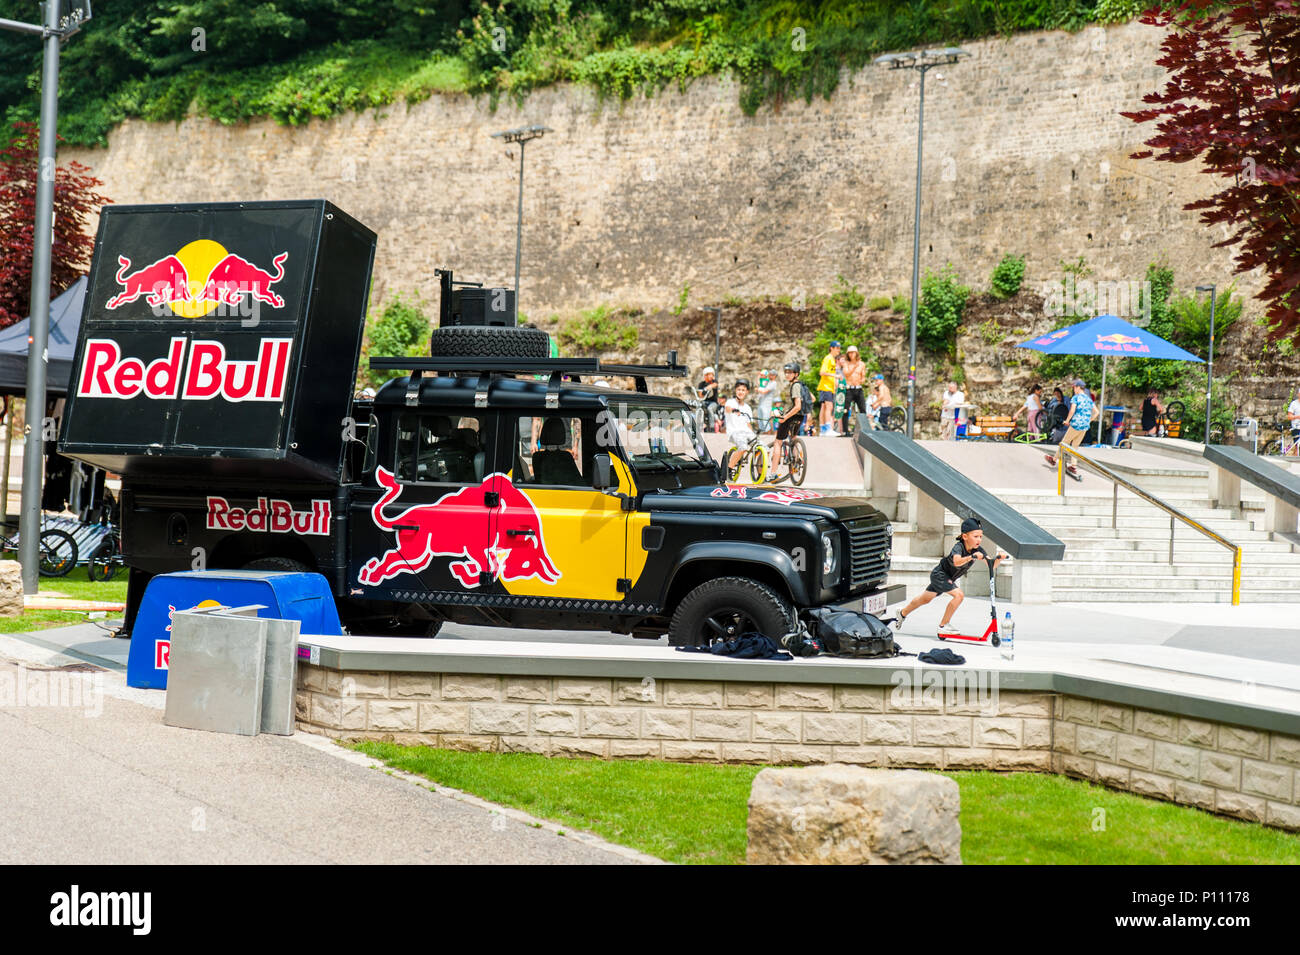 Redbull truck during the acrobatics event, Luxembourg Stock Photo